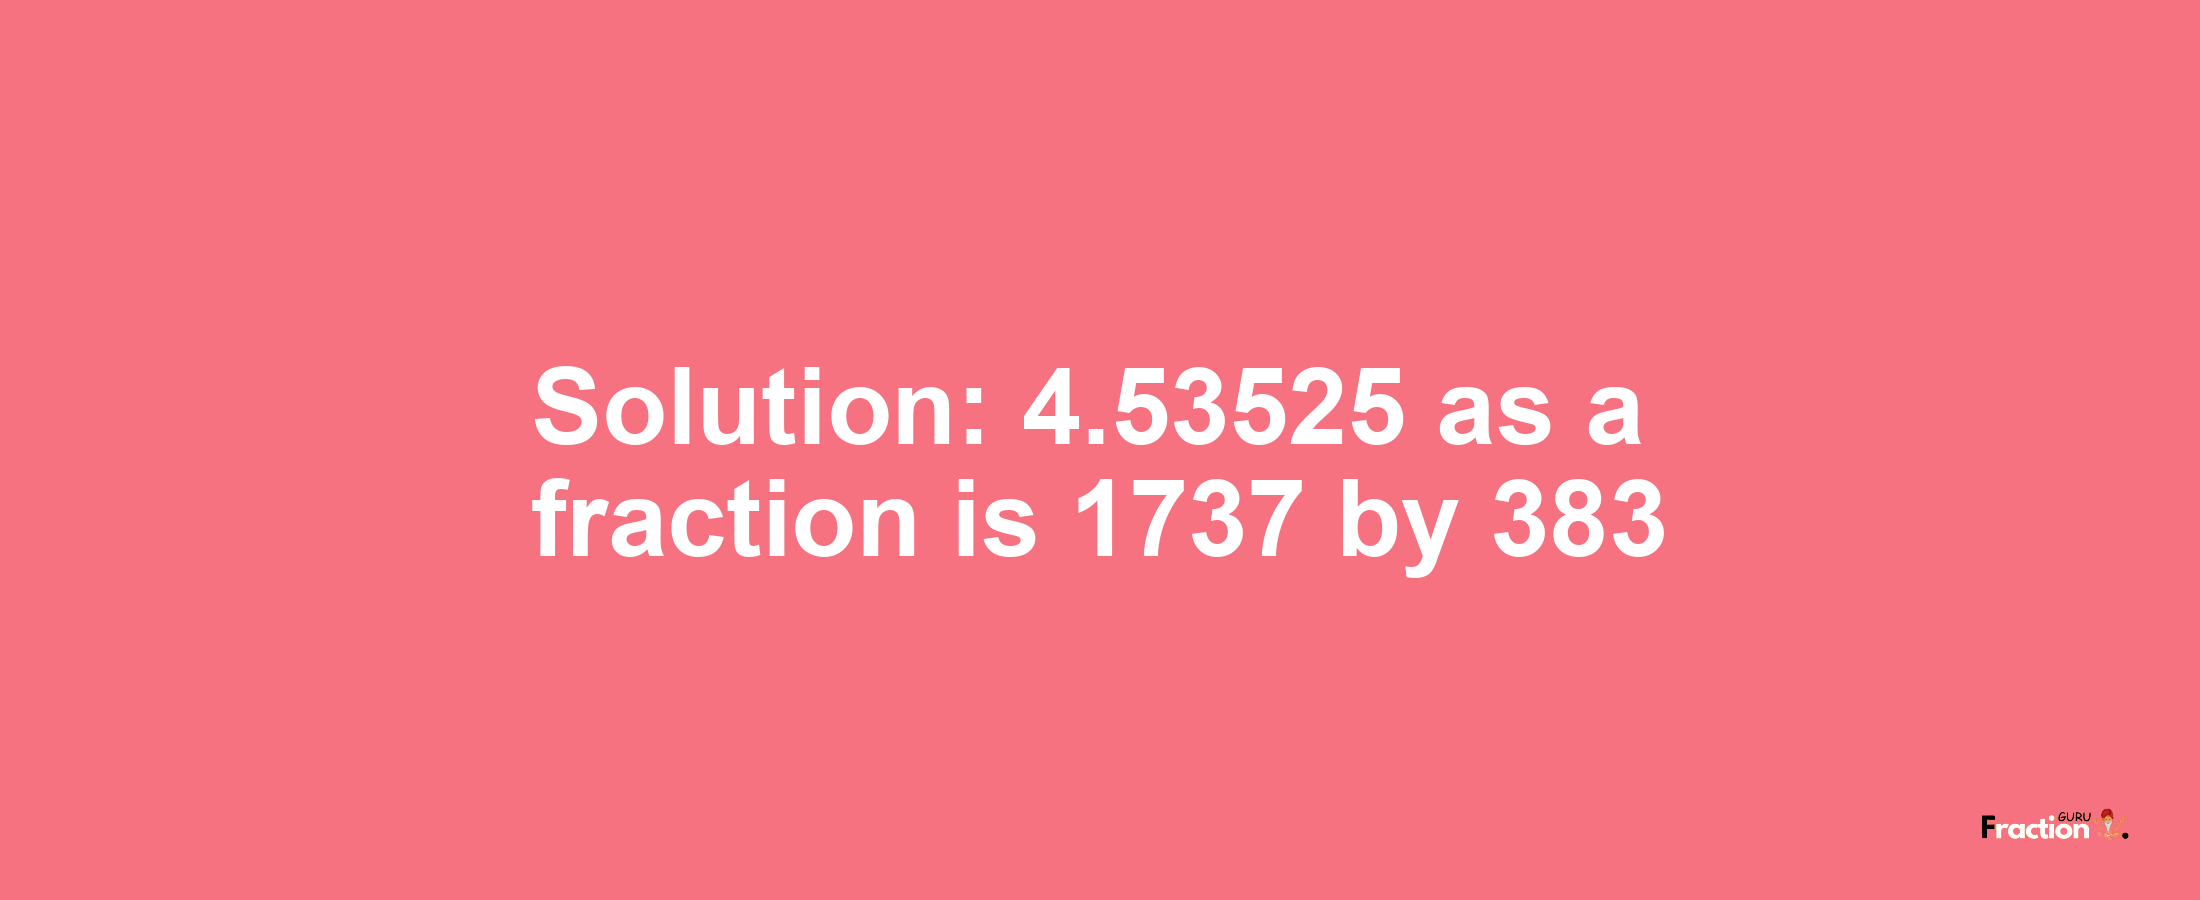 Solution:4.53525 as a fraction is 1737/383